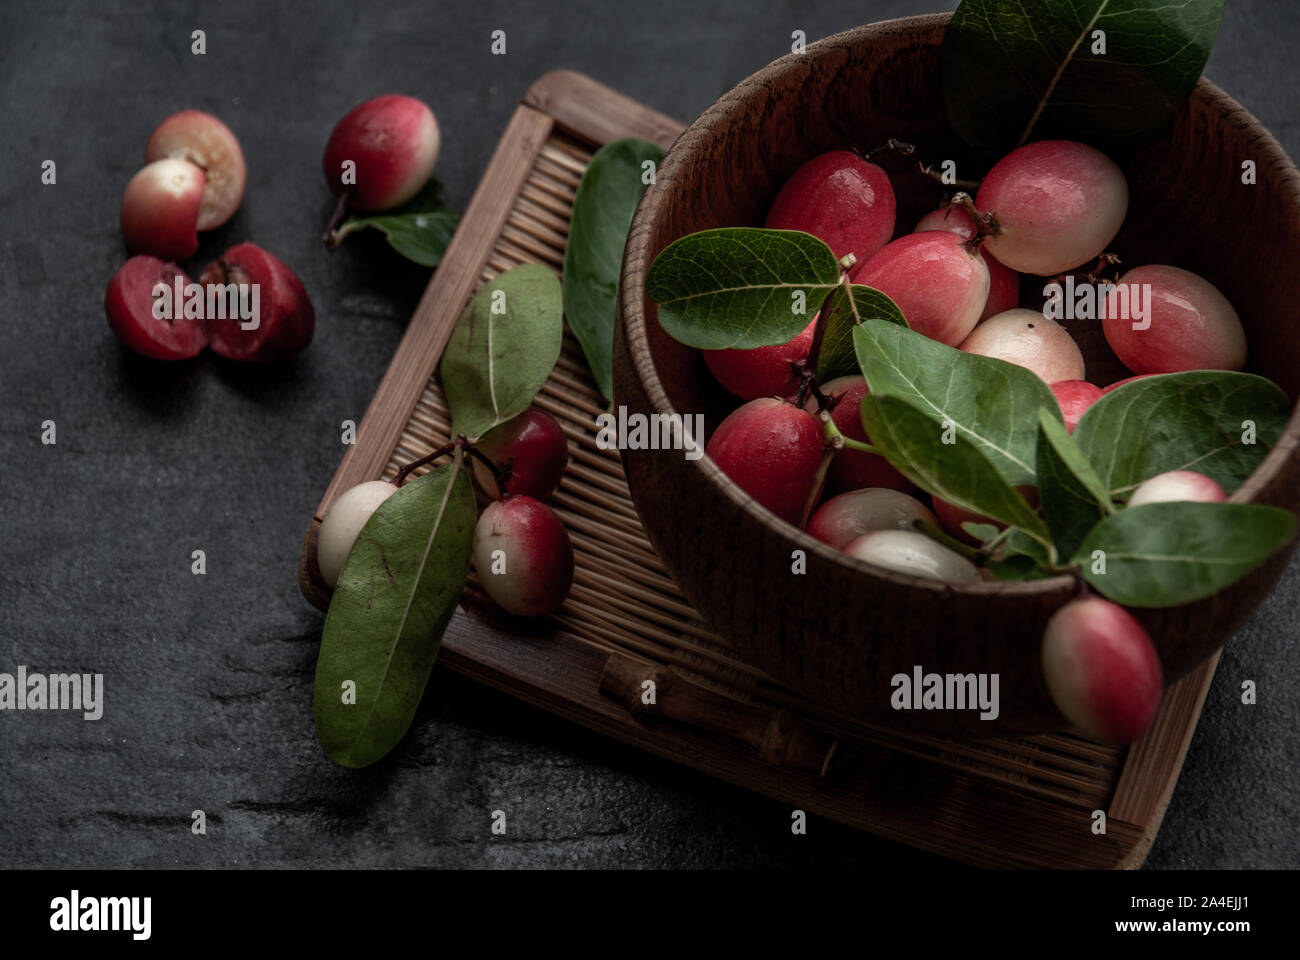 Bengal-Currants, Carandas-plum or Karonda fruit (Carissa carandas L.) sour taste fruit in Wooden cup on wicker. Oblique view from the top. Stock Photo